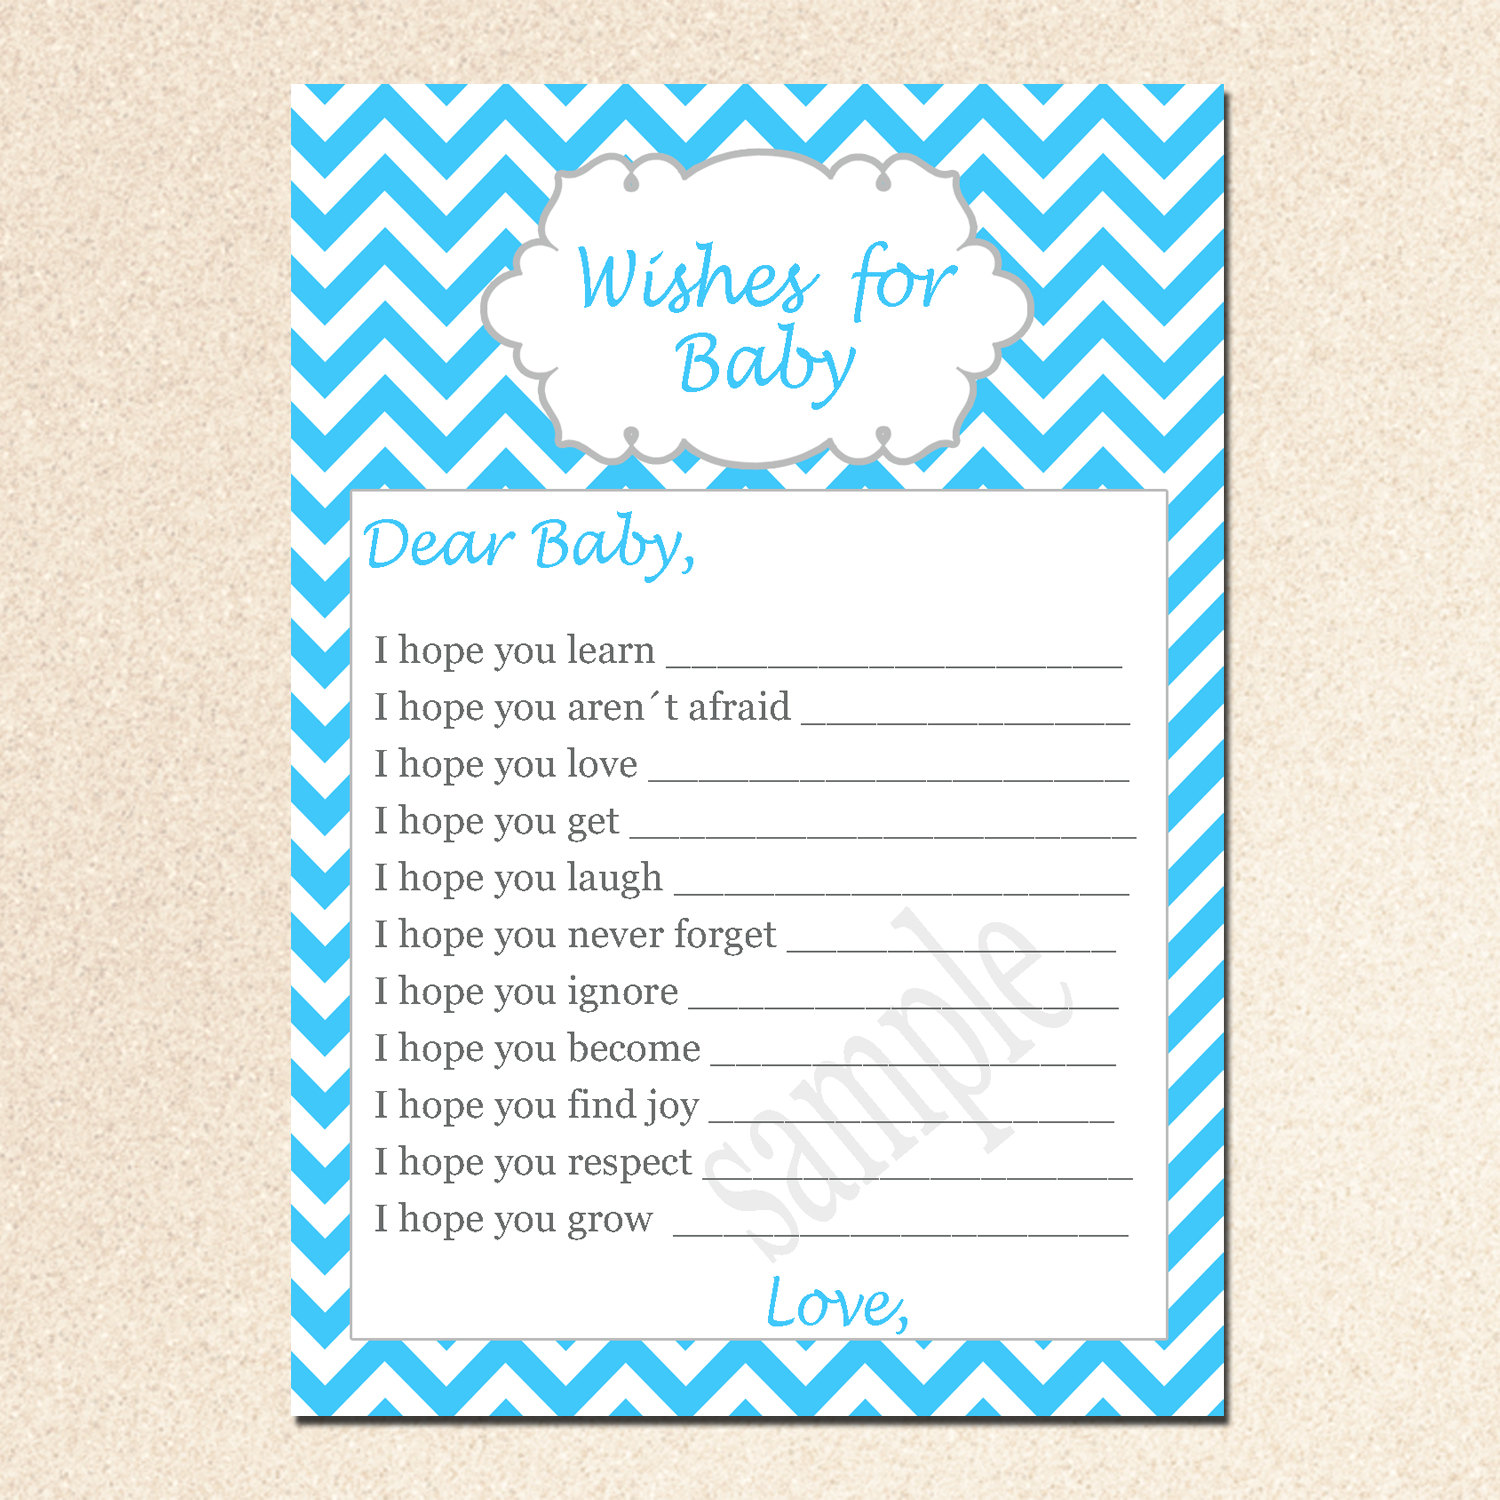 5 Best Images Of Free Printable Baby Wishes Cards Free Printable Baby Shower Wishes Free 